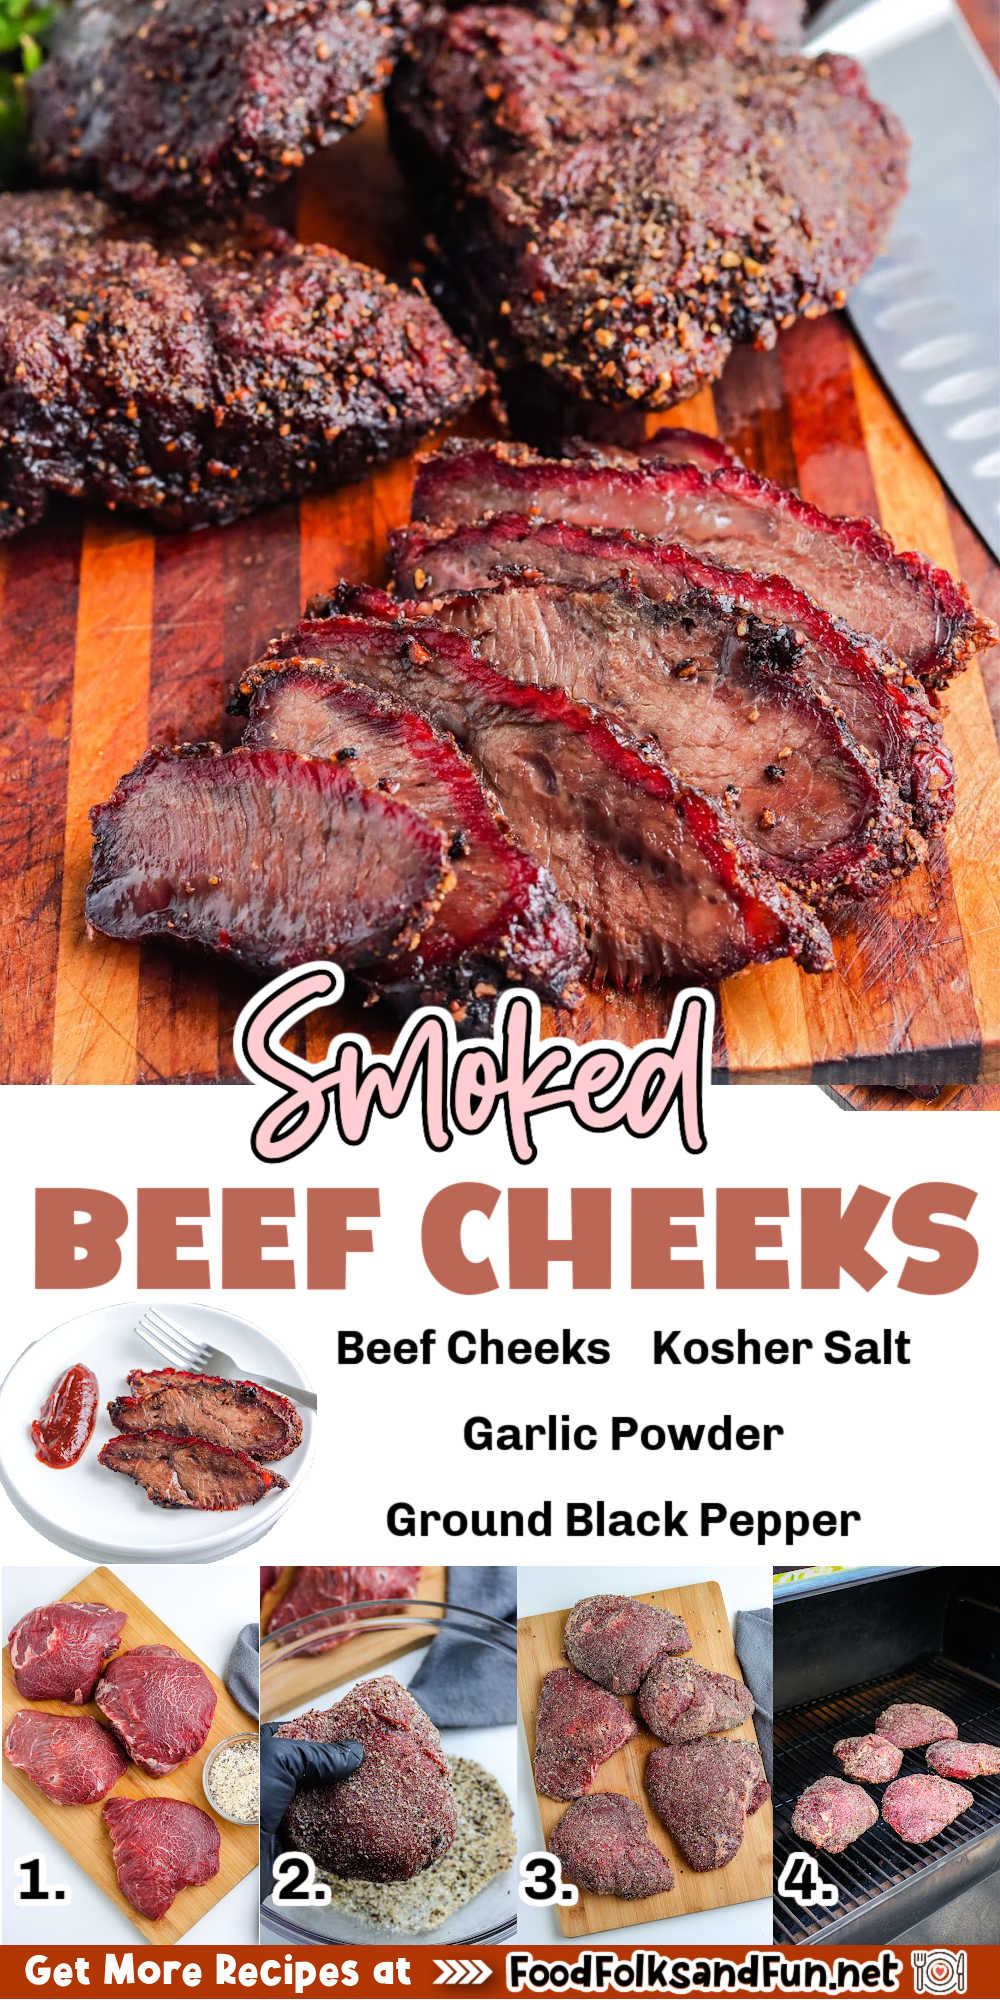 Discover the ultimate flavor sensation with this Smoked Beef Cheeks recipe. Tender, juicy, and packed with smoky goodness. via @foodfolksandfun